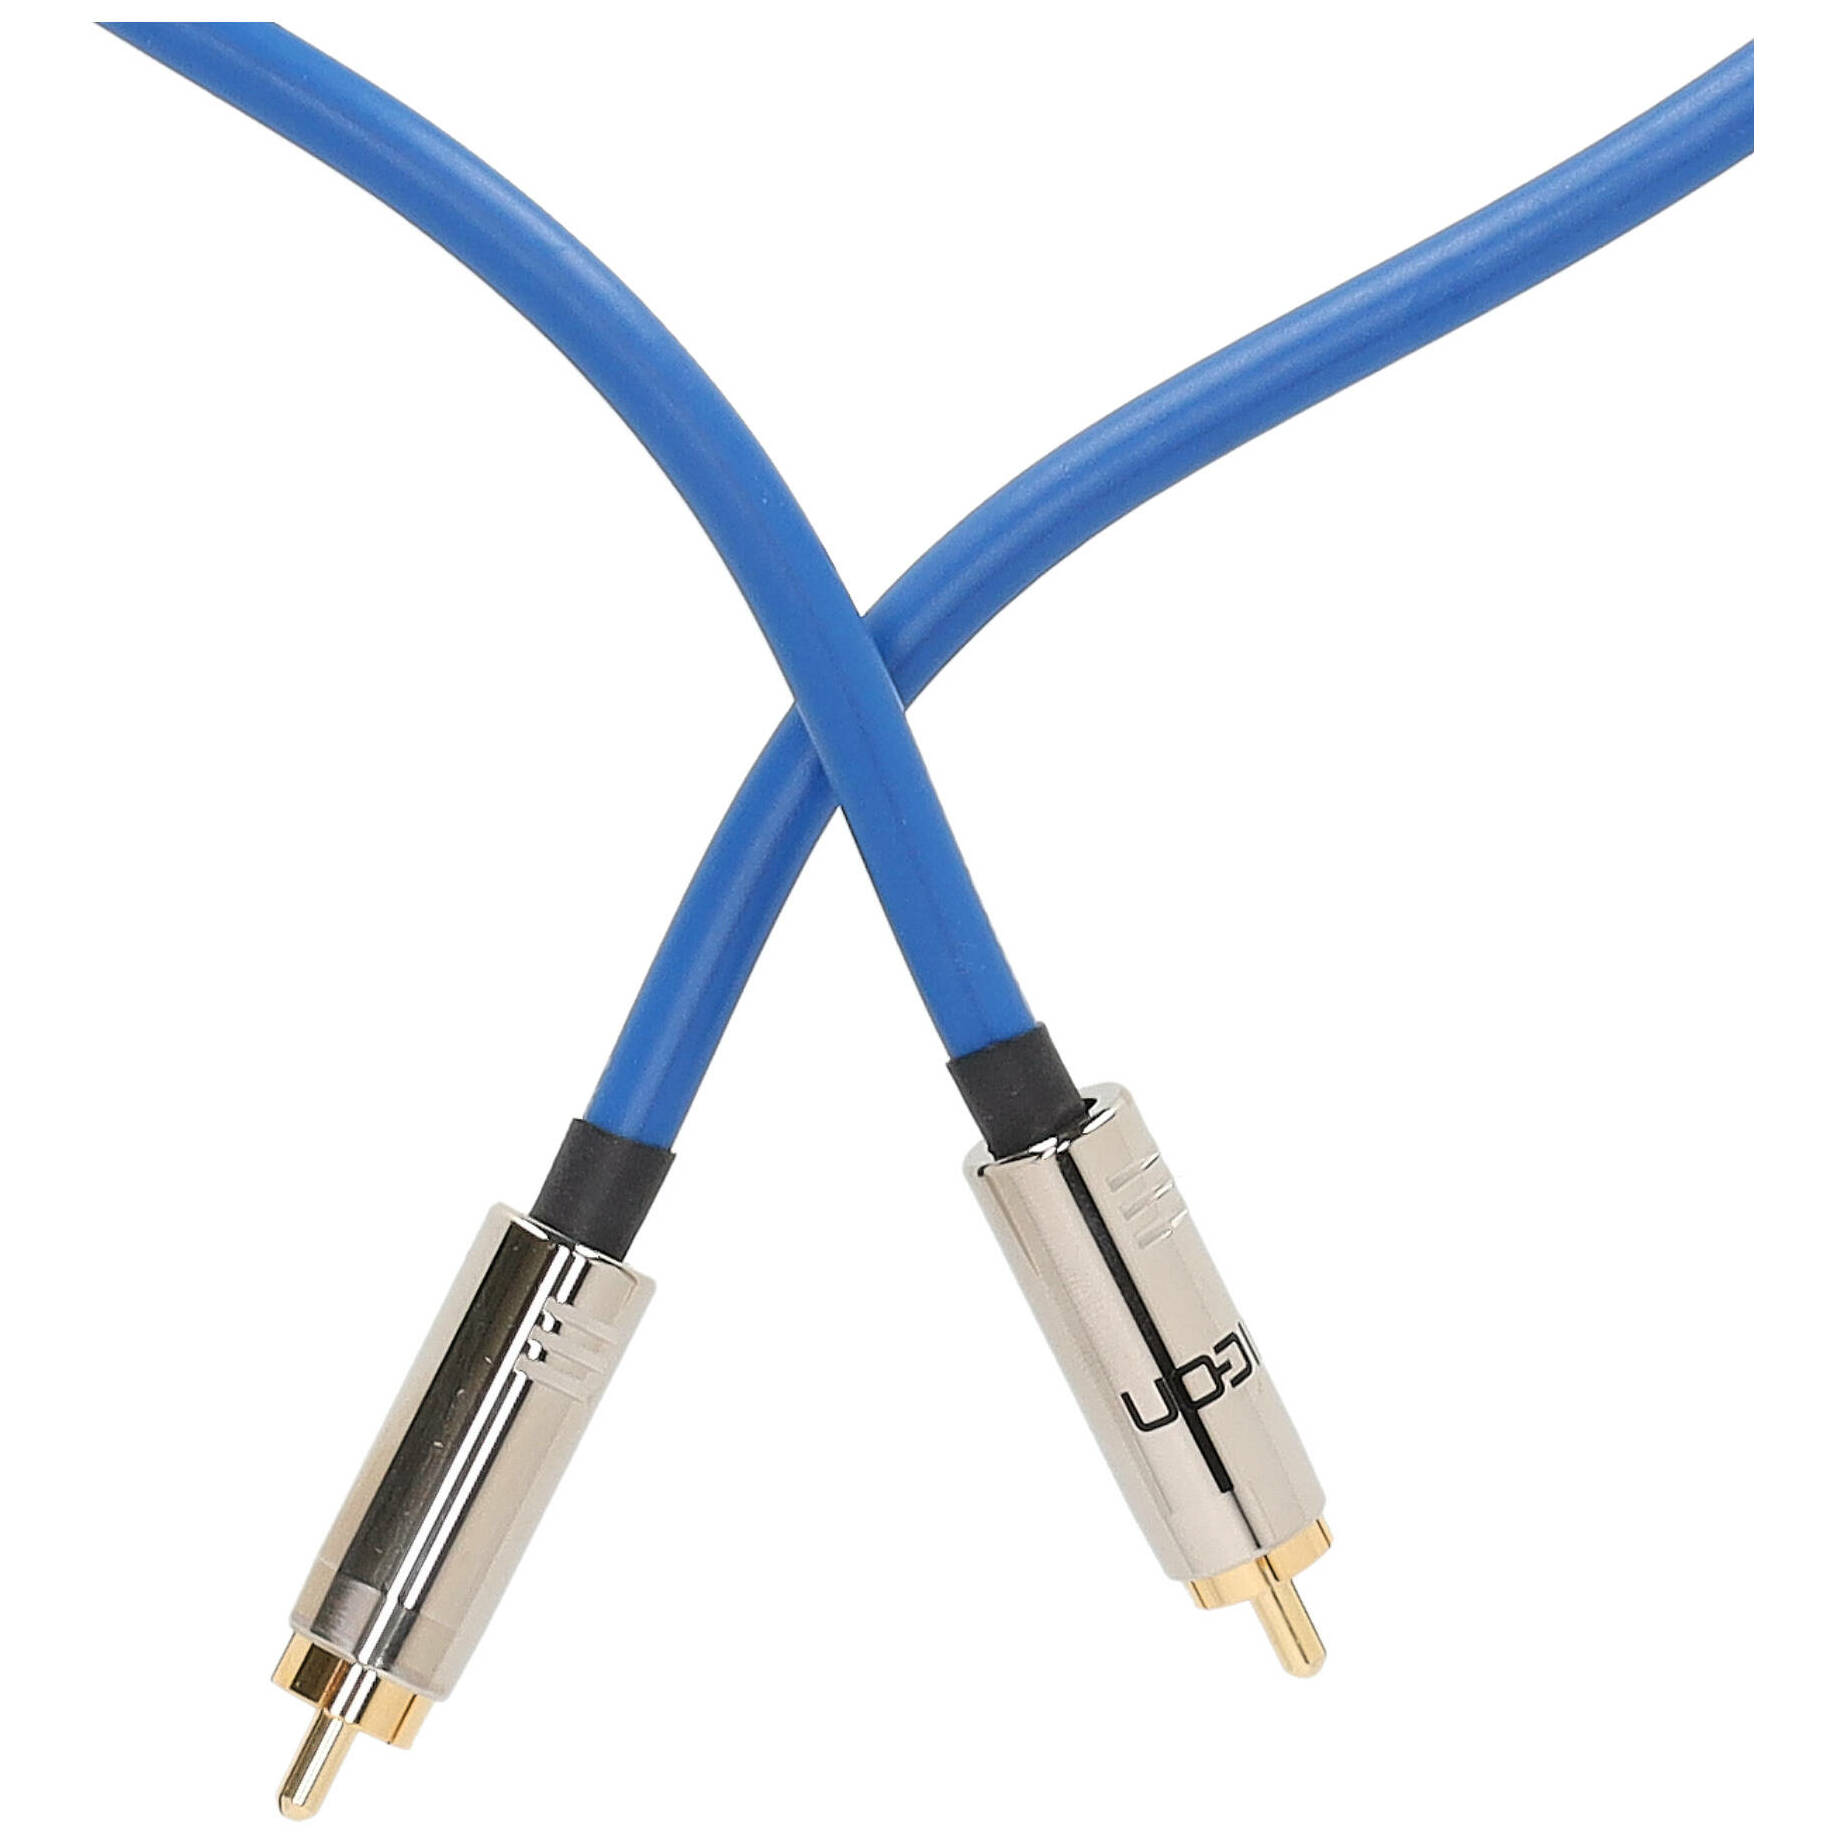 Sommer Cable VT2I-0300 SC-VECTOR 0.8/3.7 S/PDIF 75 Ohm Cinch male - Cinch male 3 Meter - Blau 2